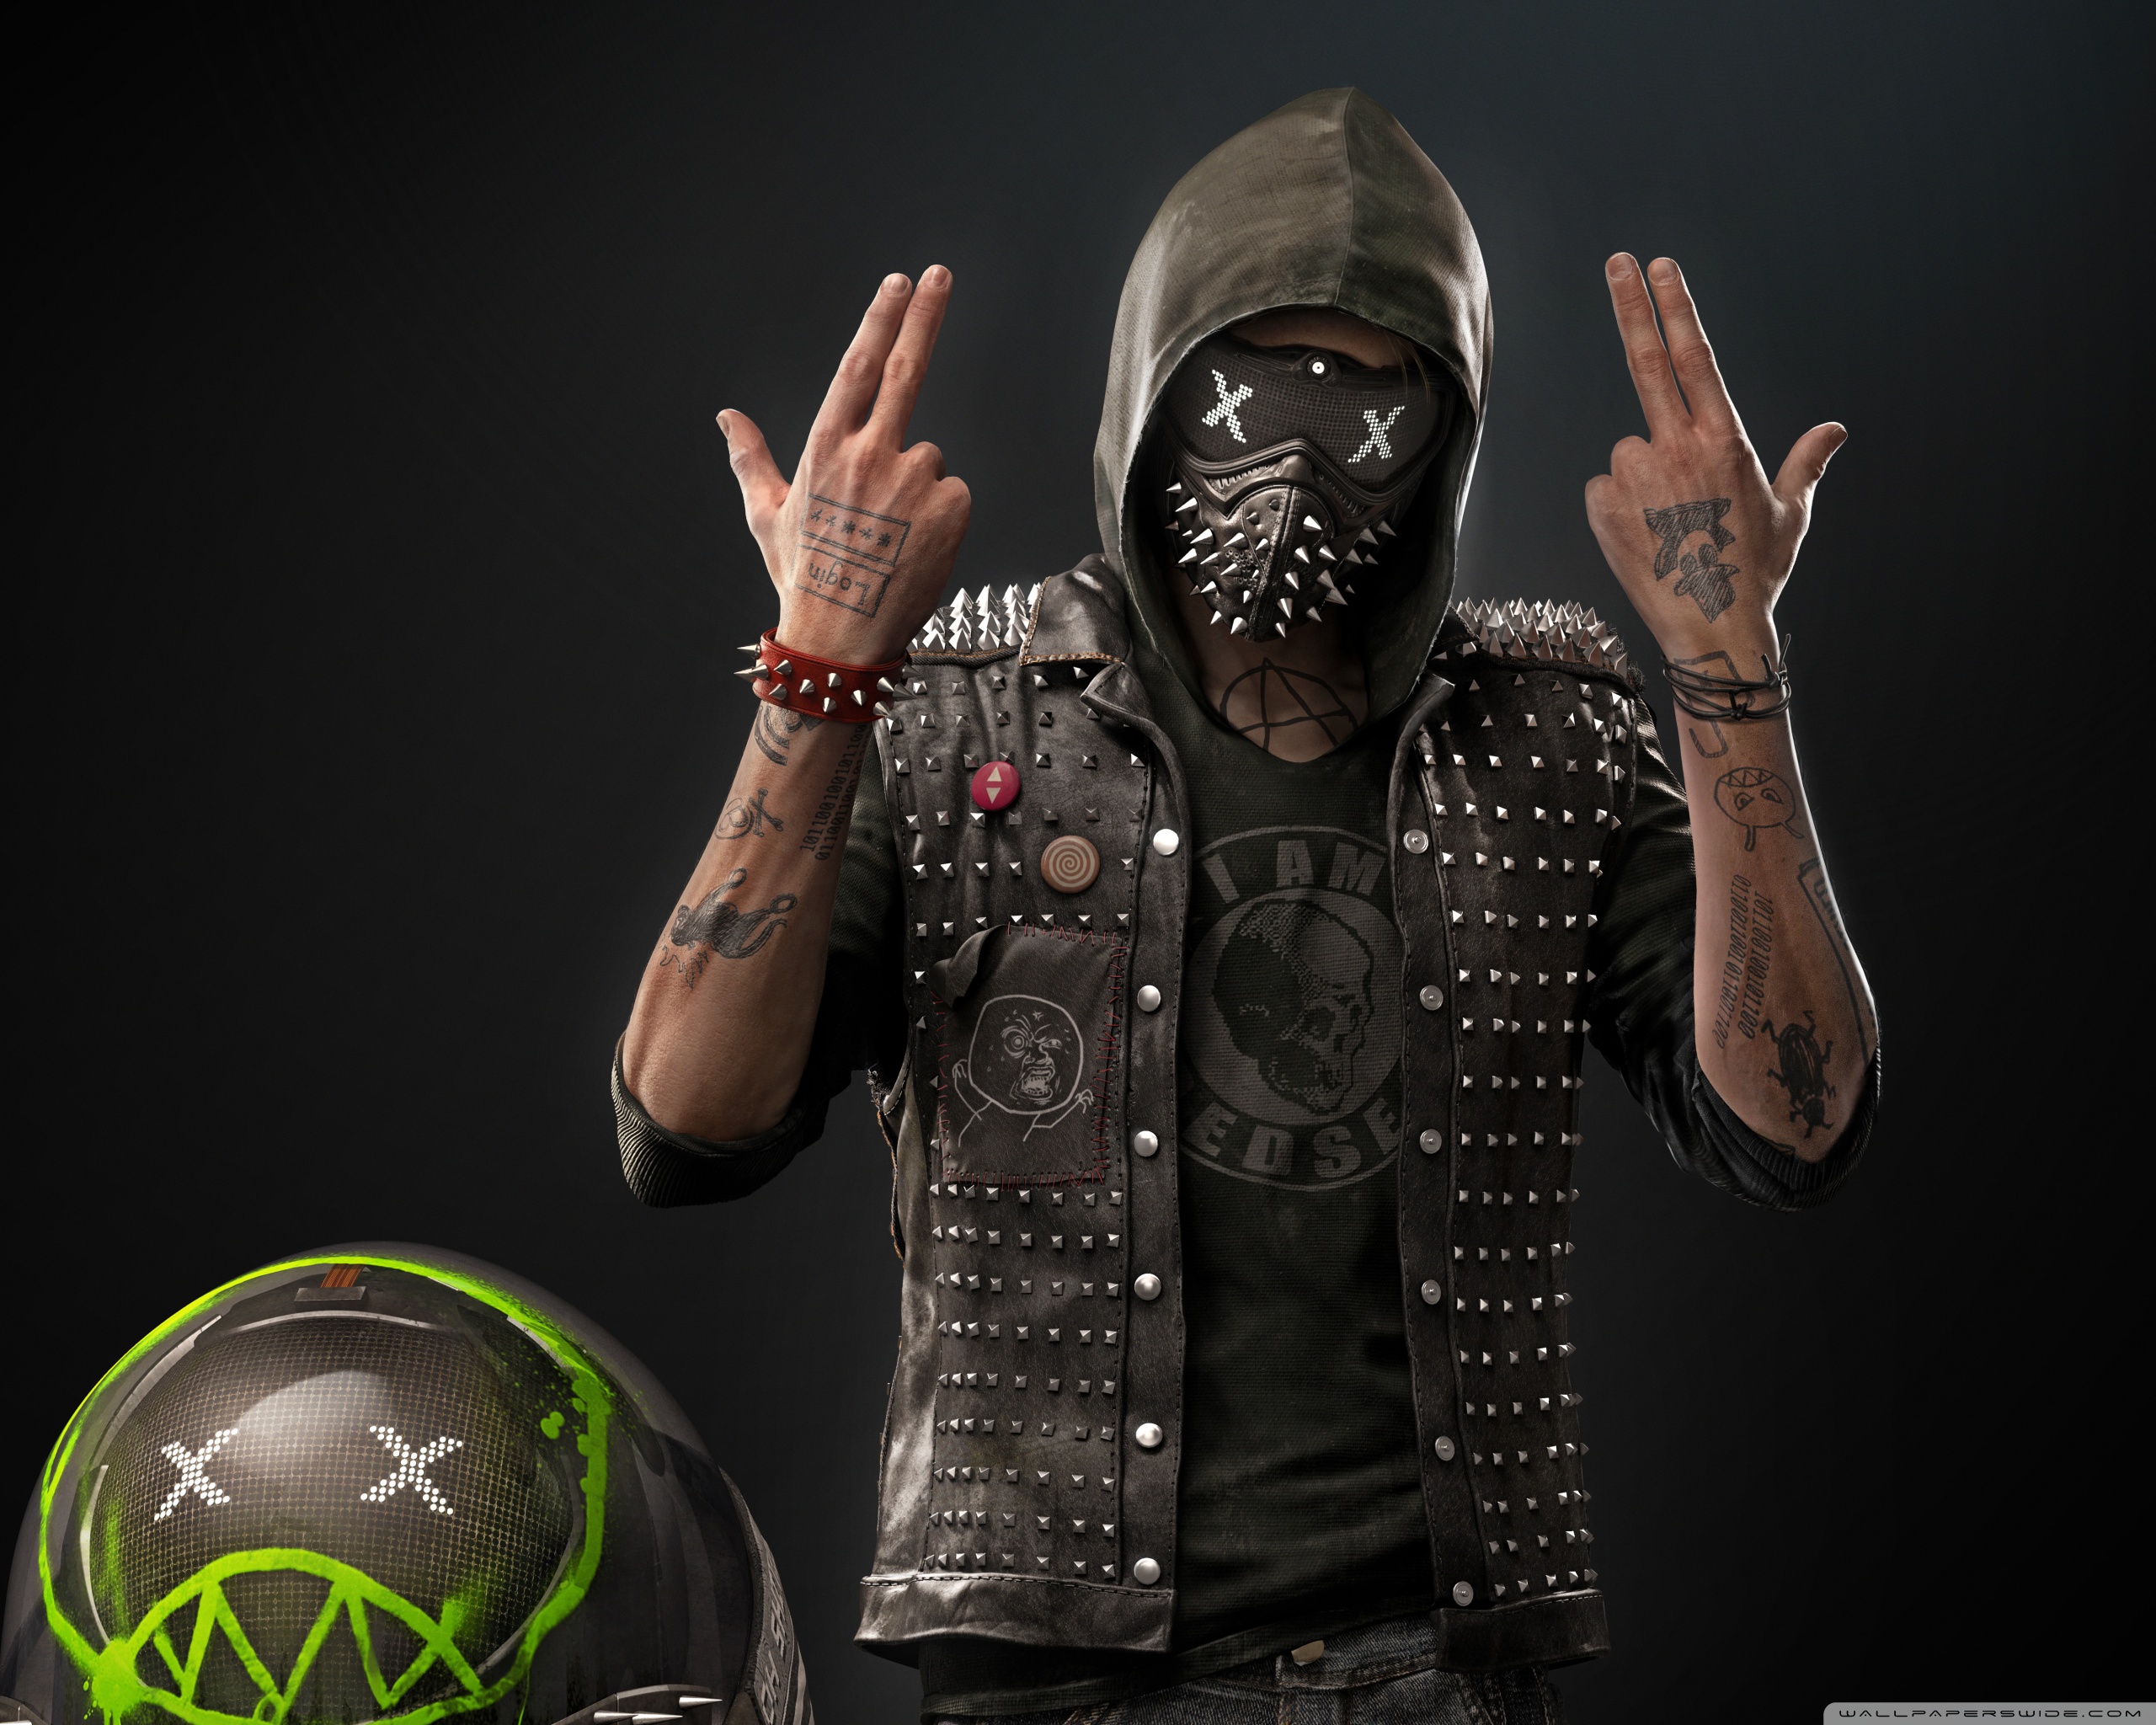 Wrench Mask From Watch Dogs 2 - HD Wallpaper 